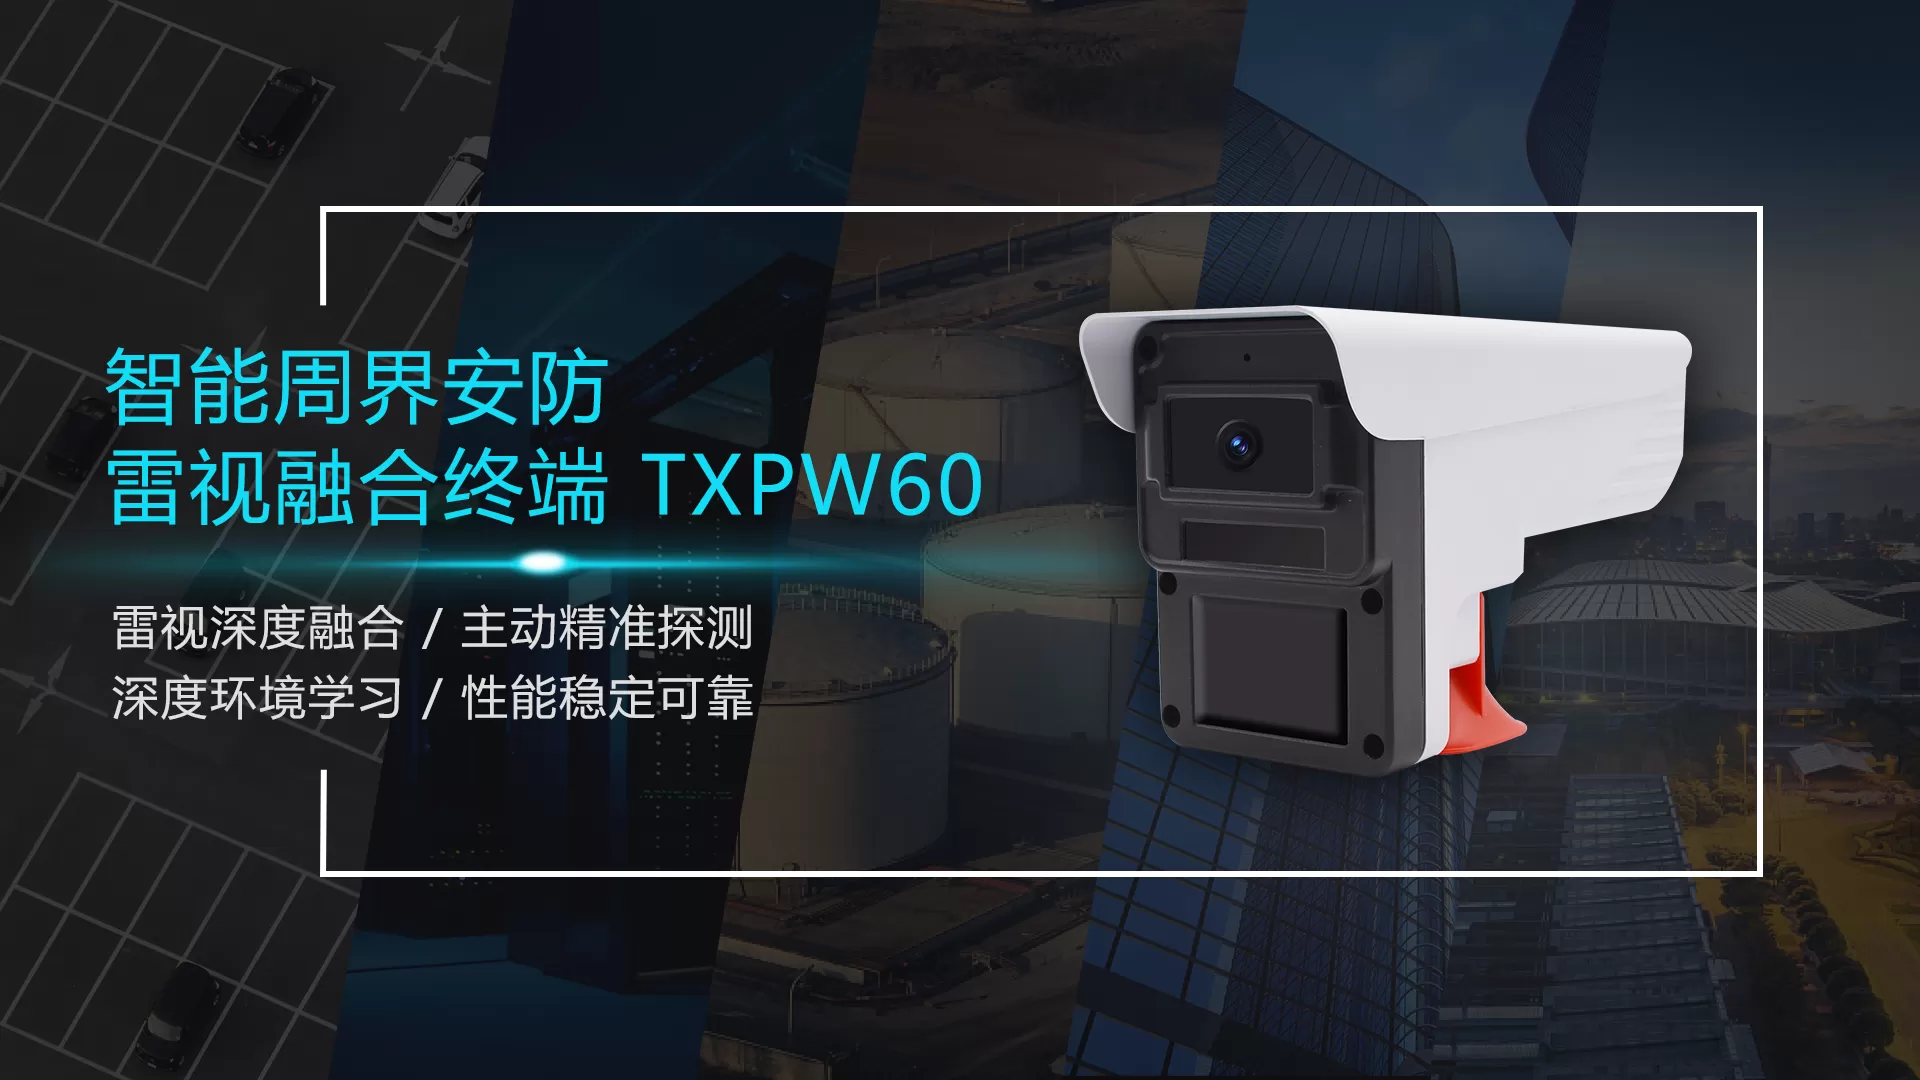 TXPW60 small body big ability, thunder vision fusion power intelligent security!